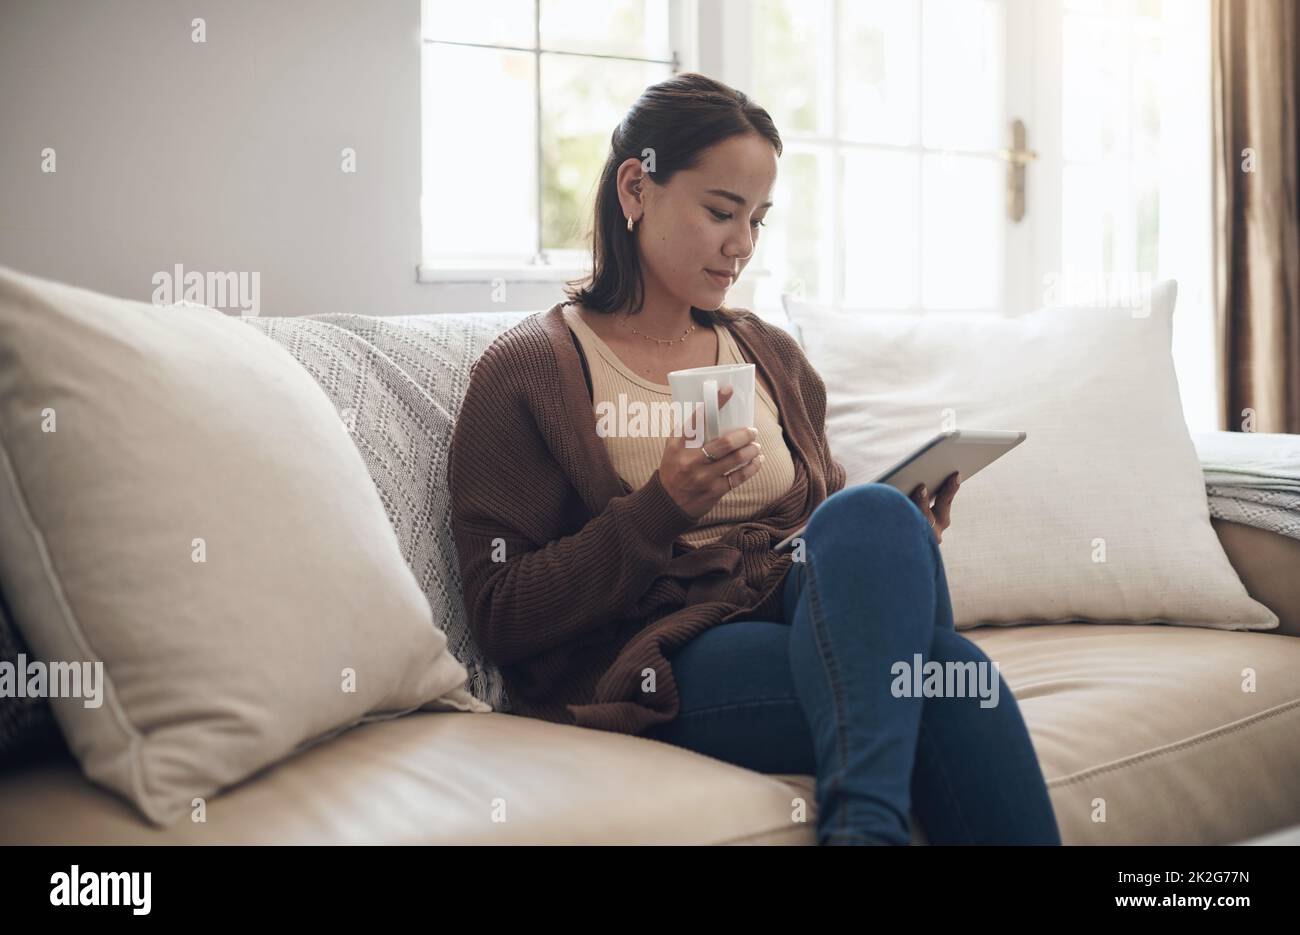 Coffee and a good ebook pairs so well. Shot of a young woman using a digital tablet while drinking coffee at home. Stock Photo